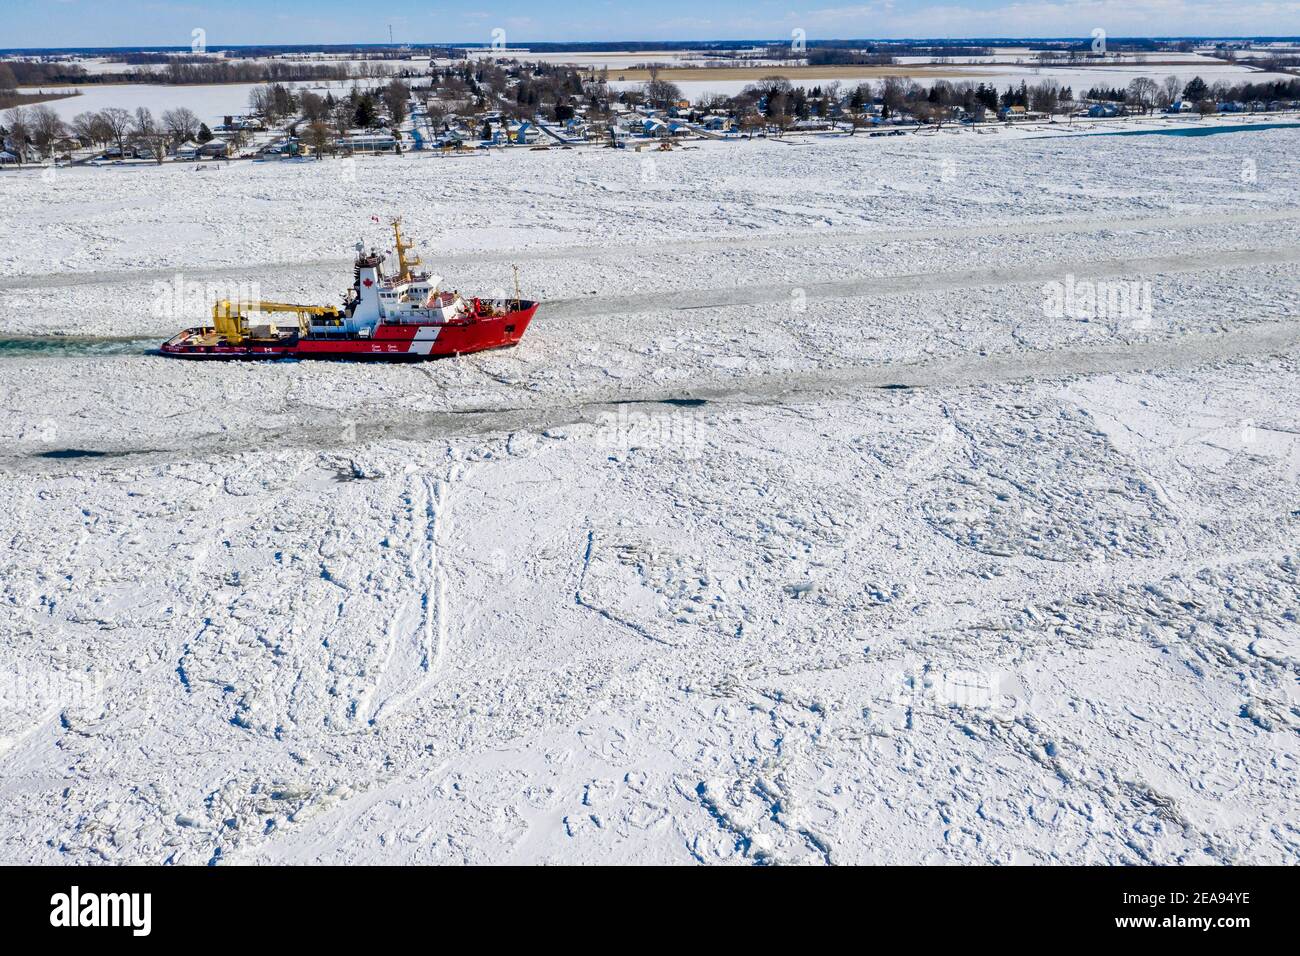 Roberts Landing, Michigan, USA. 7th Feb, 2021. The Canadian Coast Guard icebreaker Samuel Risley breaks up ice on the St. Clair River. Bitter cold has led to ice jams on the river and flooding in shoreline communities. The St. Clair River is the border between the U.S. and Canada; it drains the upper Great Lakes towards Lake St. Clair and on to Lake Erie. Credit: Jim West/Alamy Live News Stock Photo